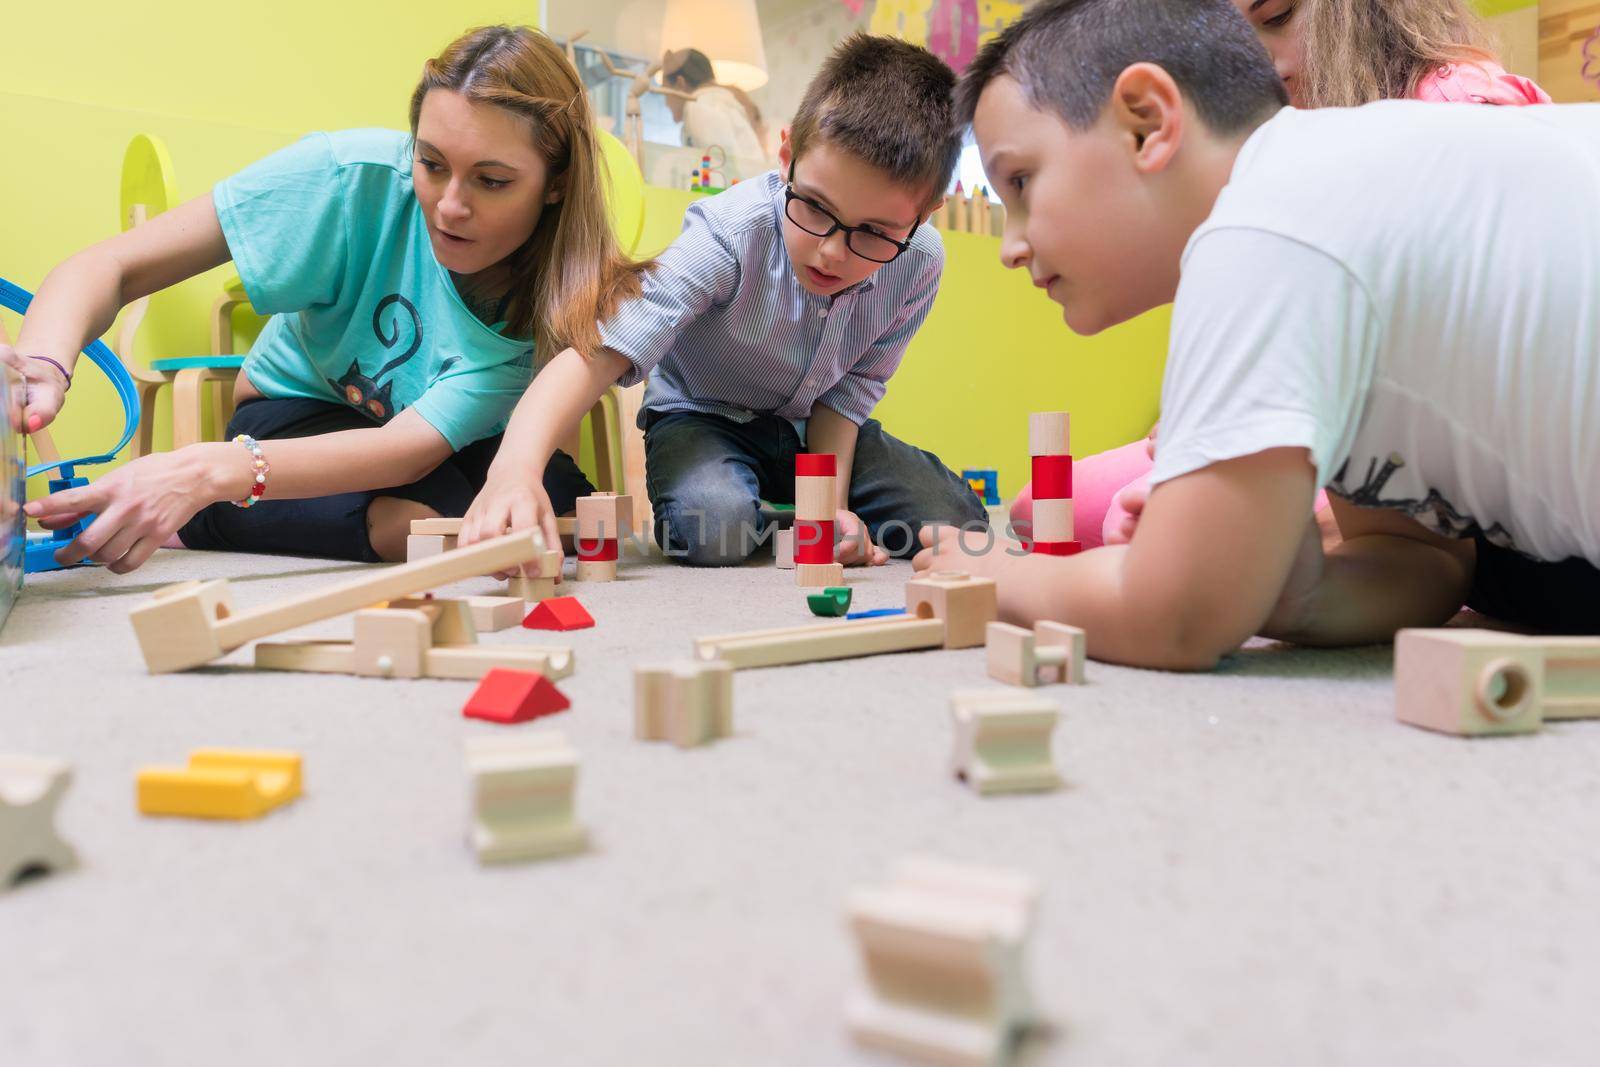 High-angle view of a young female educator teaching children to build with patience a wooden train circuit, during playtime on the floor in the kindergarten classroom